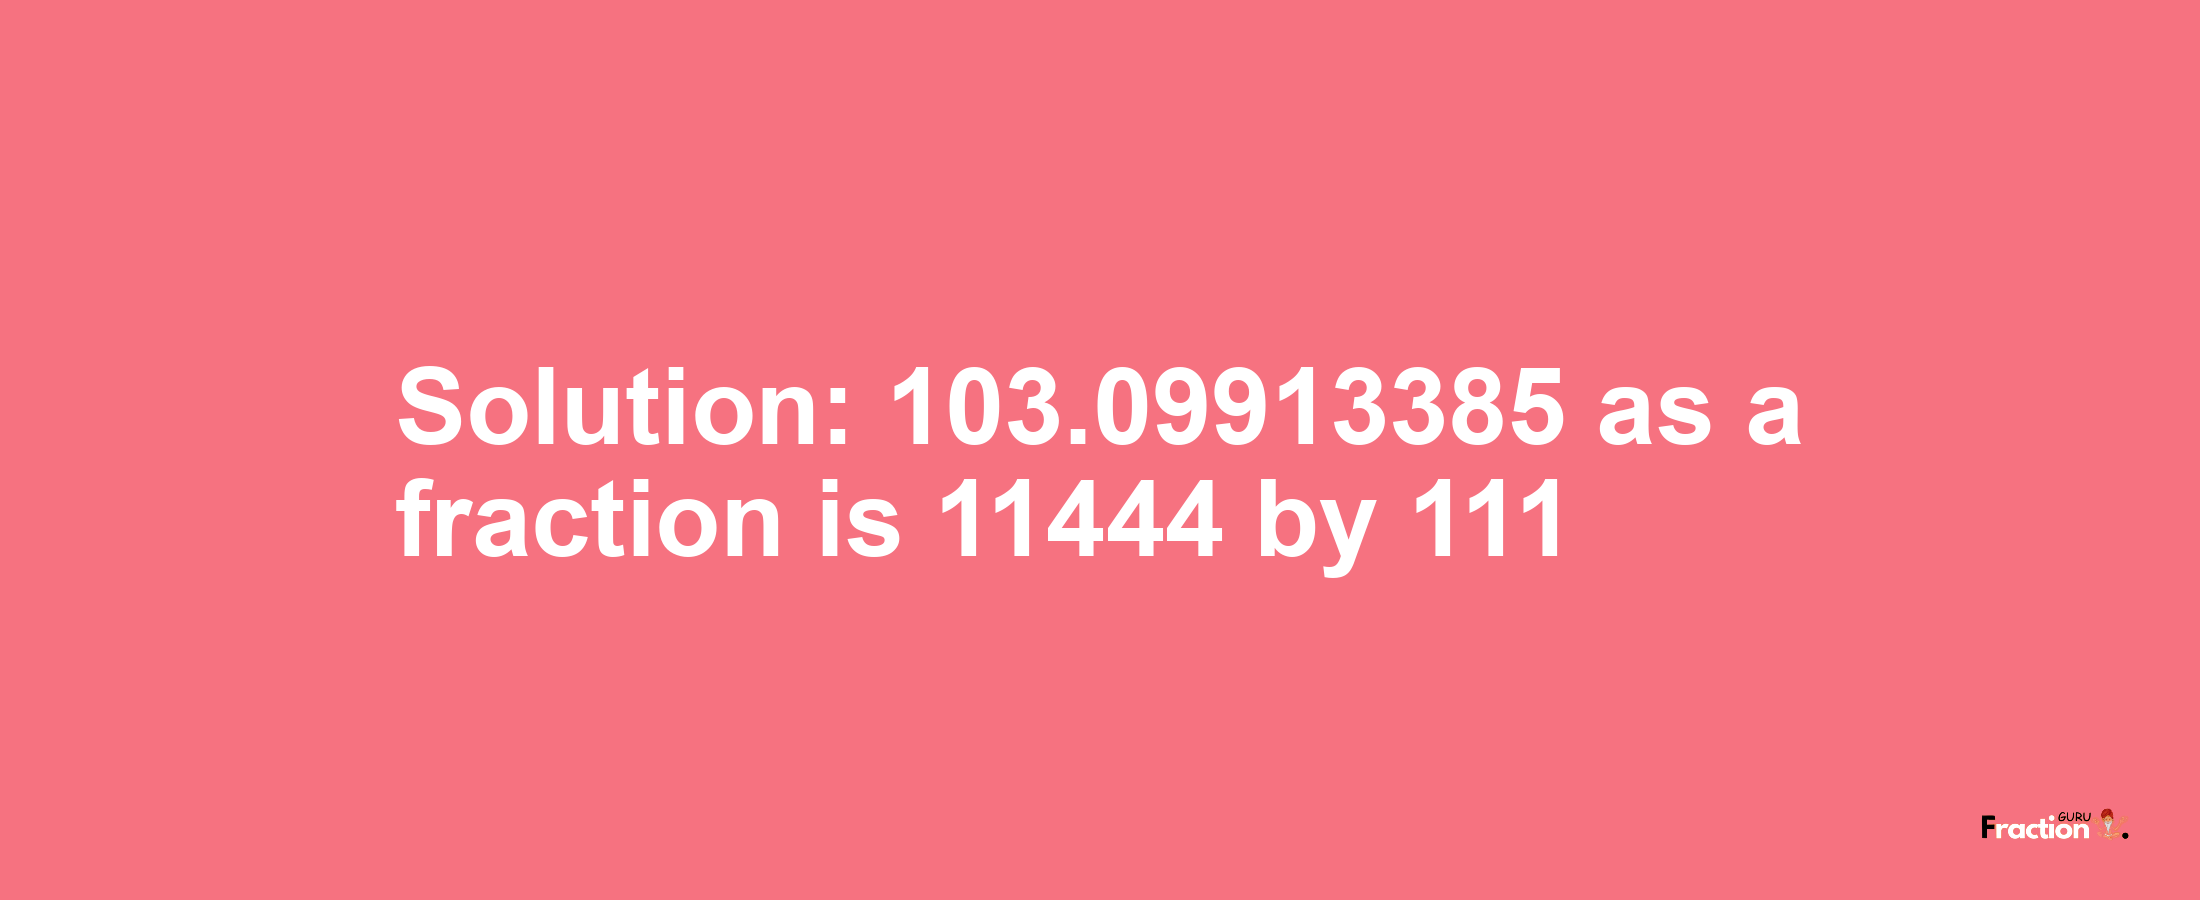 Solution:103.09913385 as a fraction is 11444/111